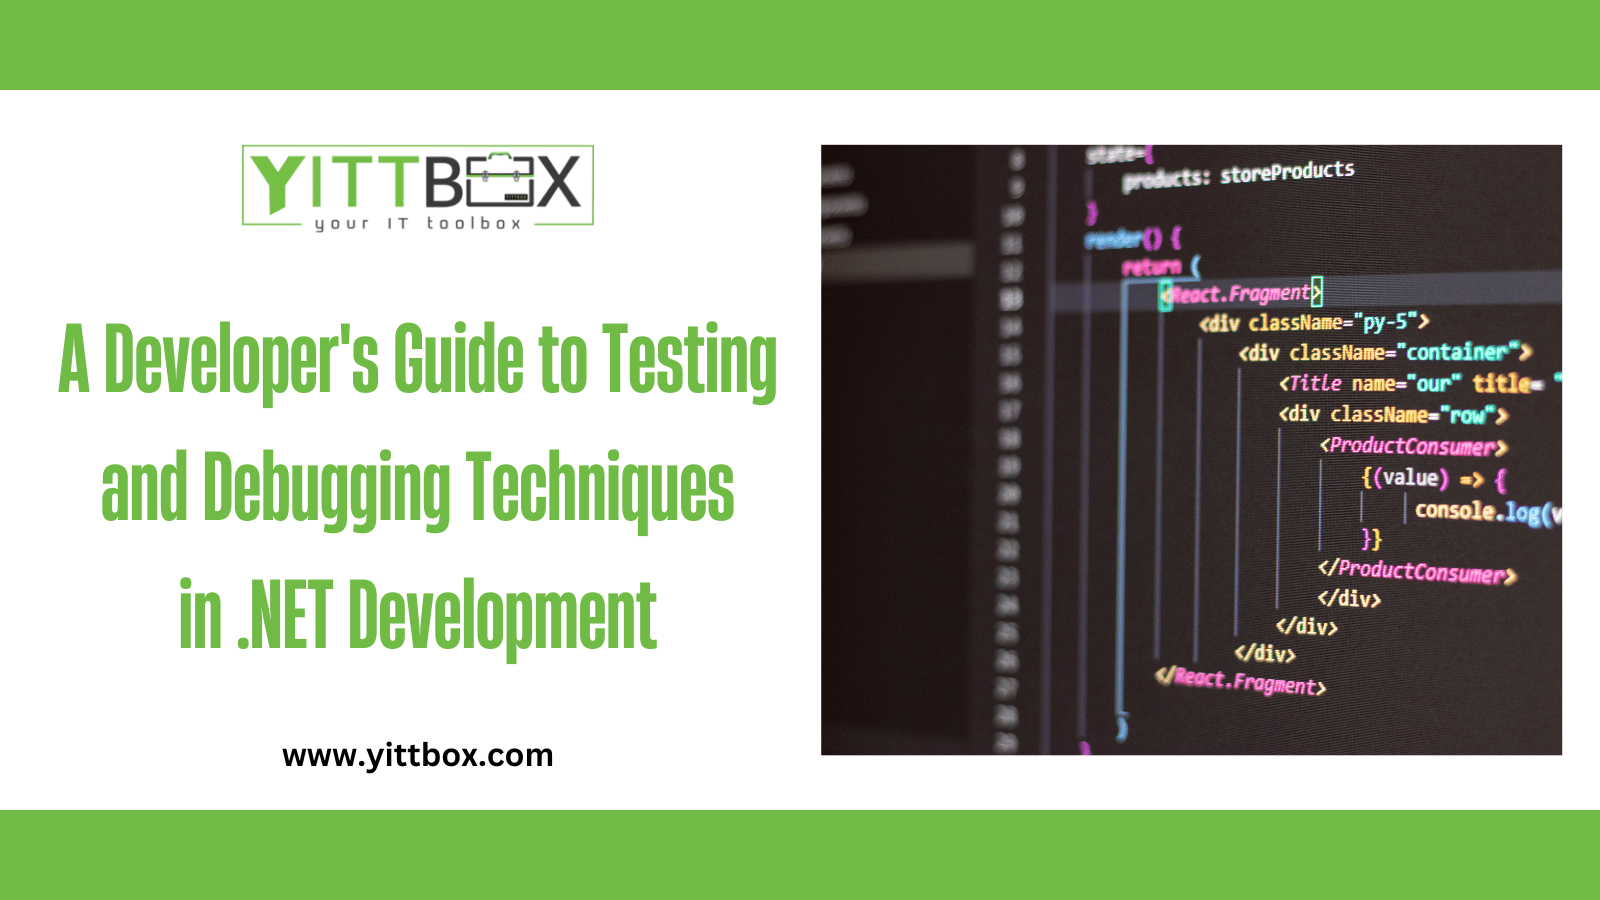 A Developer's Guide to Testing and Debugging Techniques in .NET Development